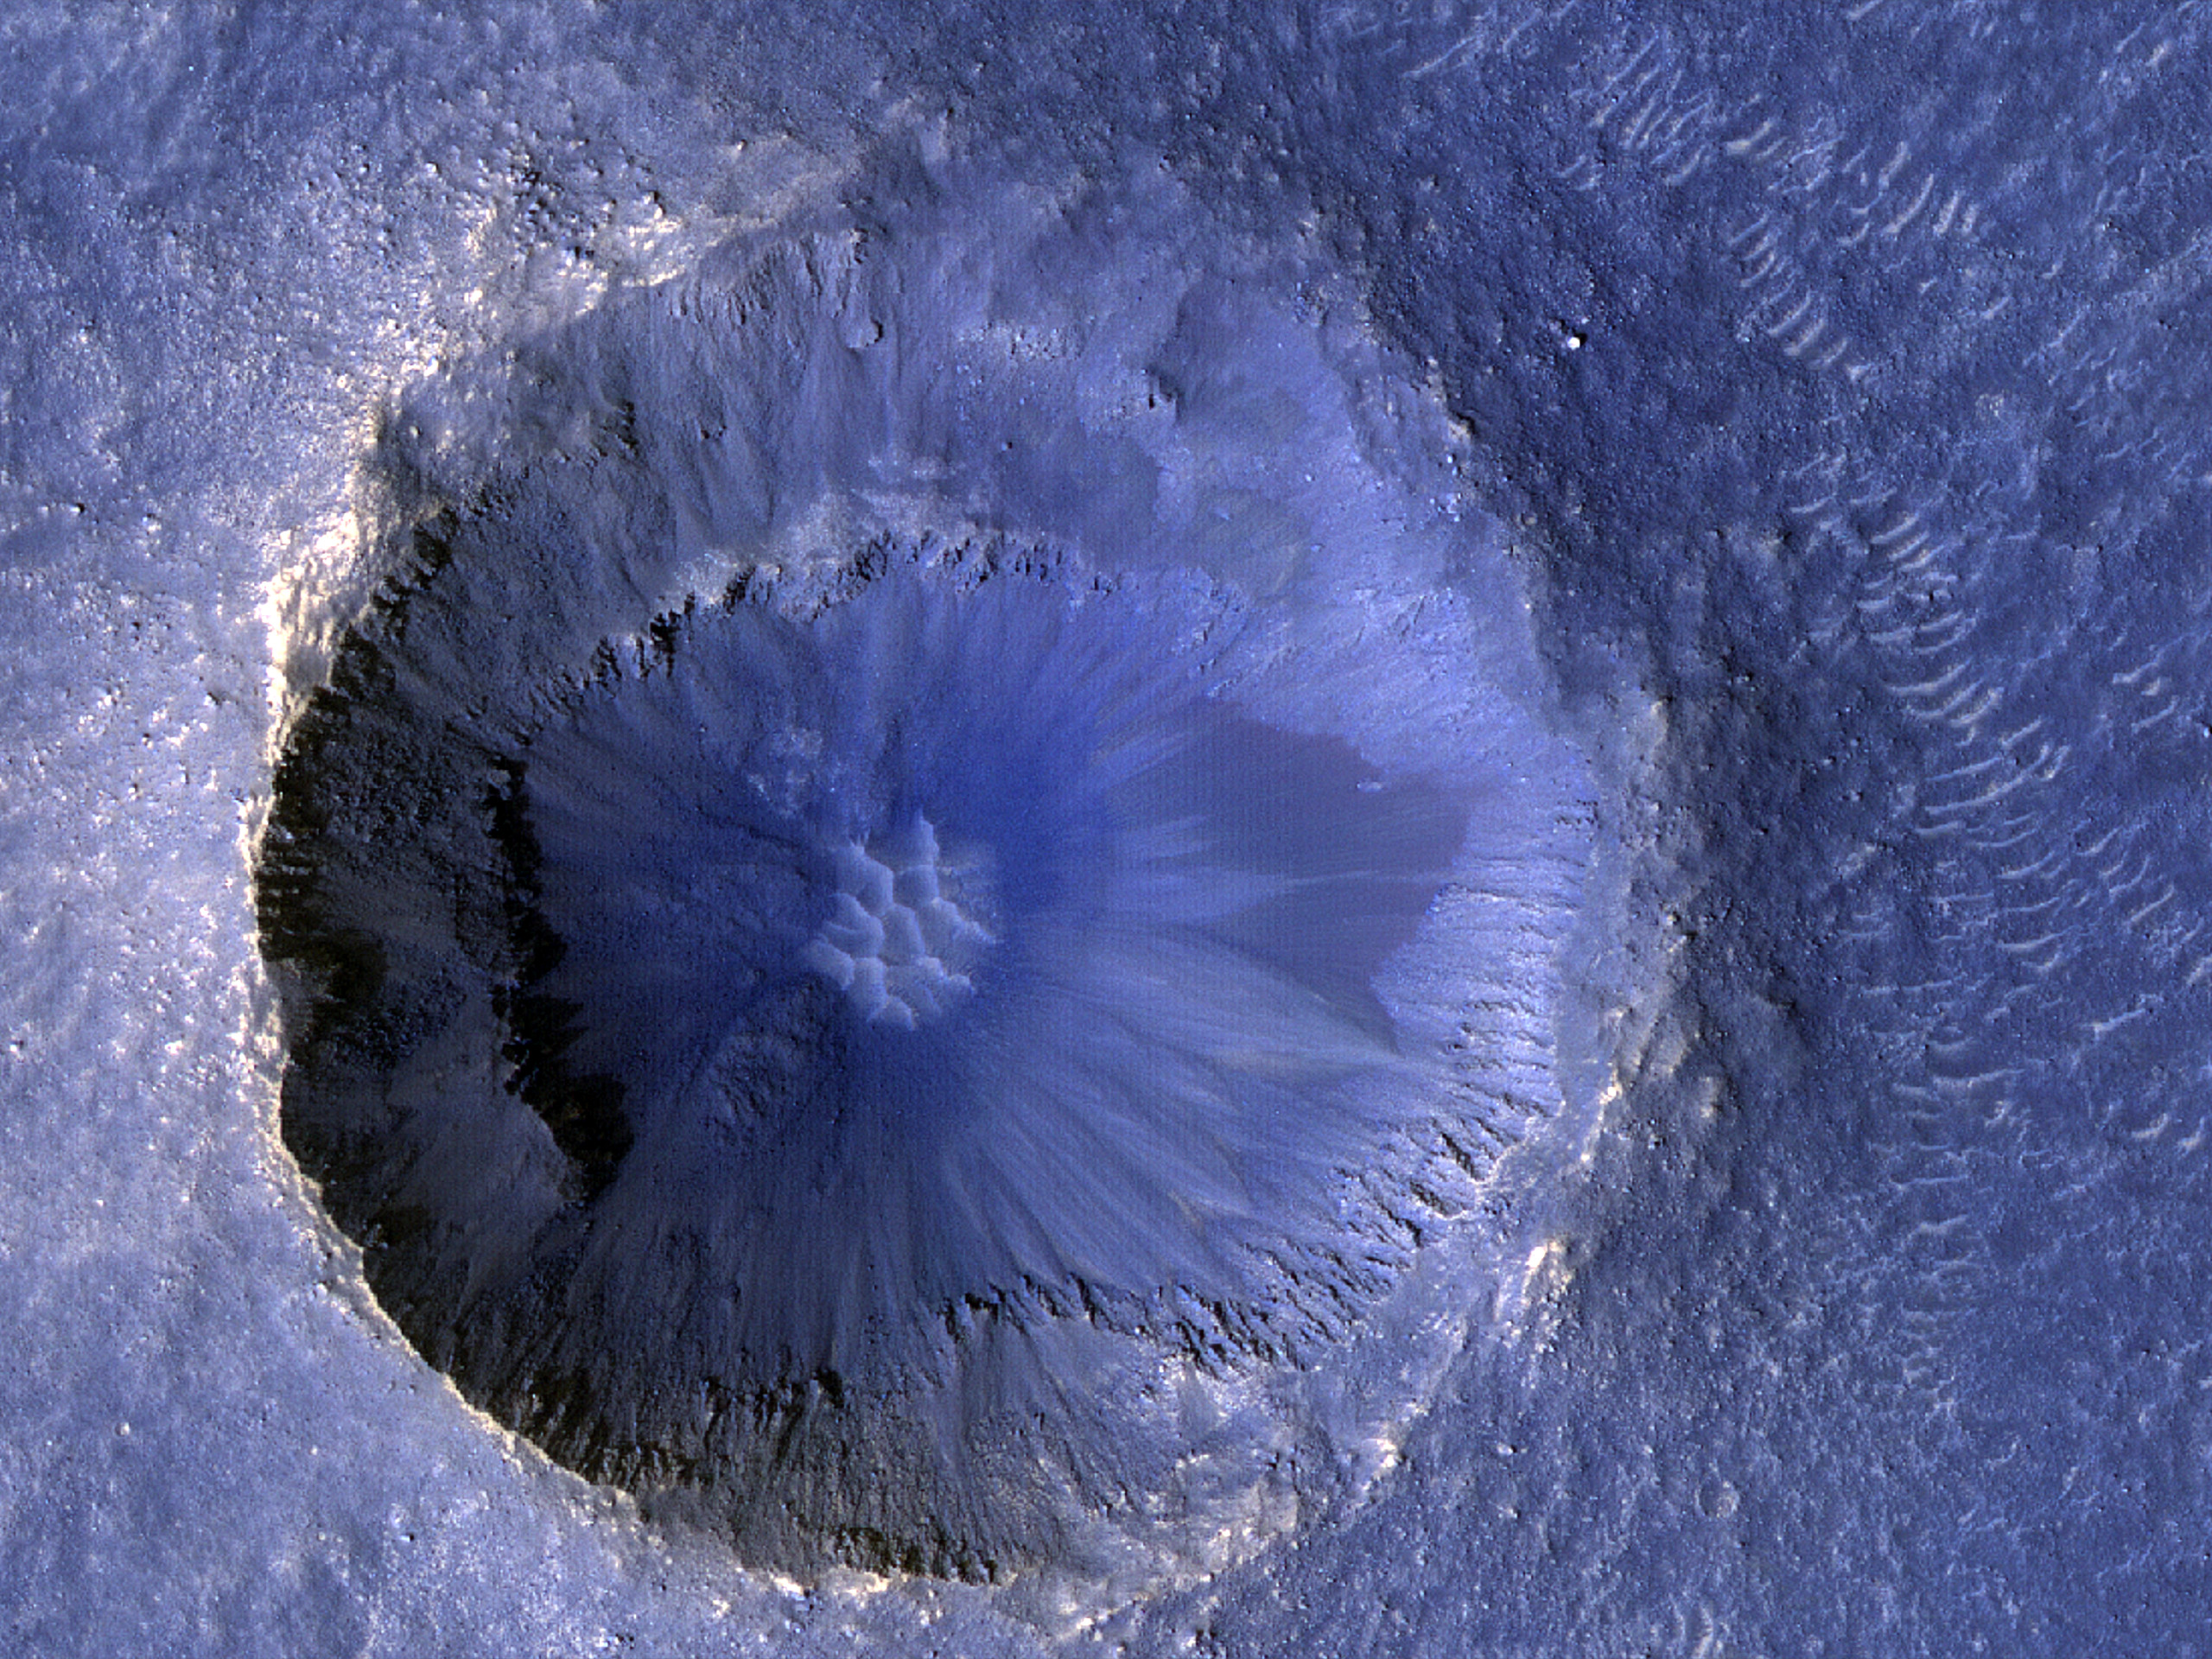 A Small, Very Recent Impact Crater